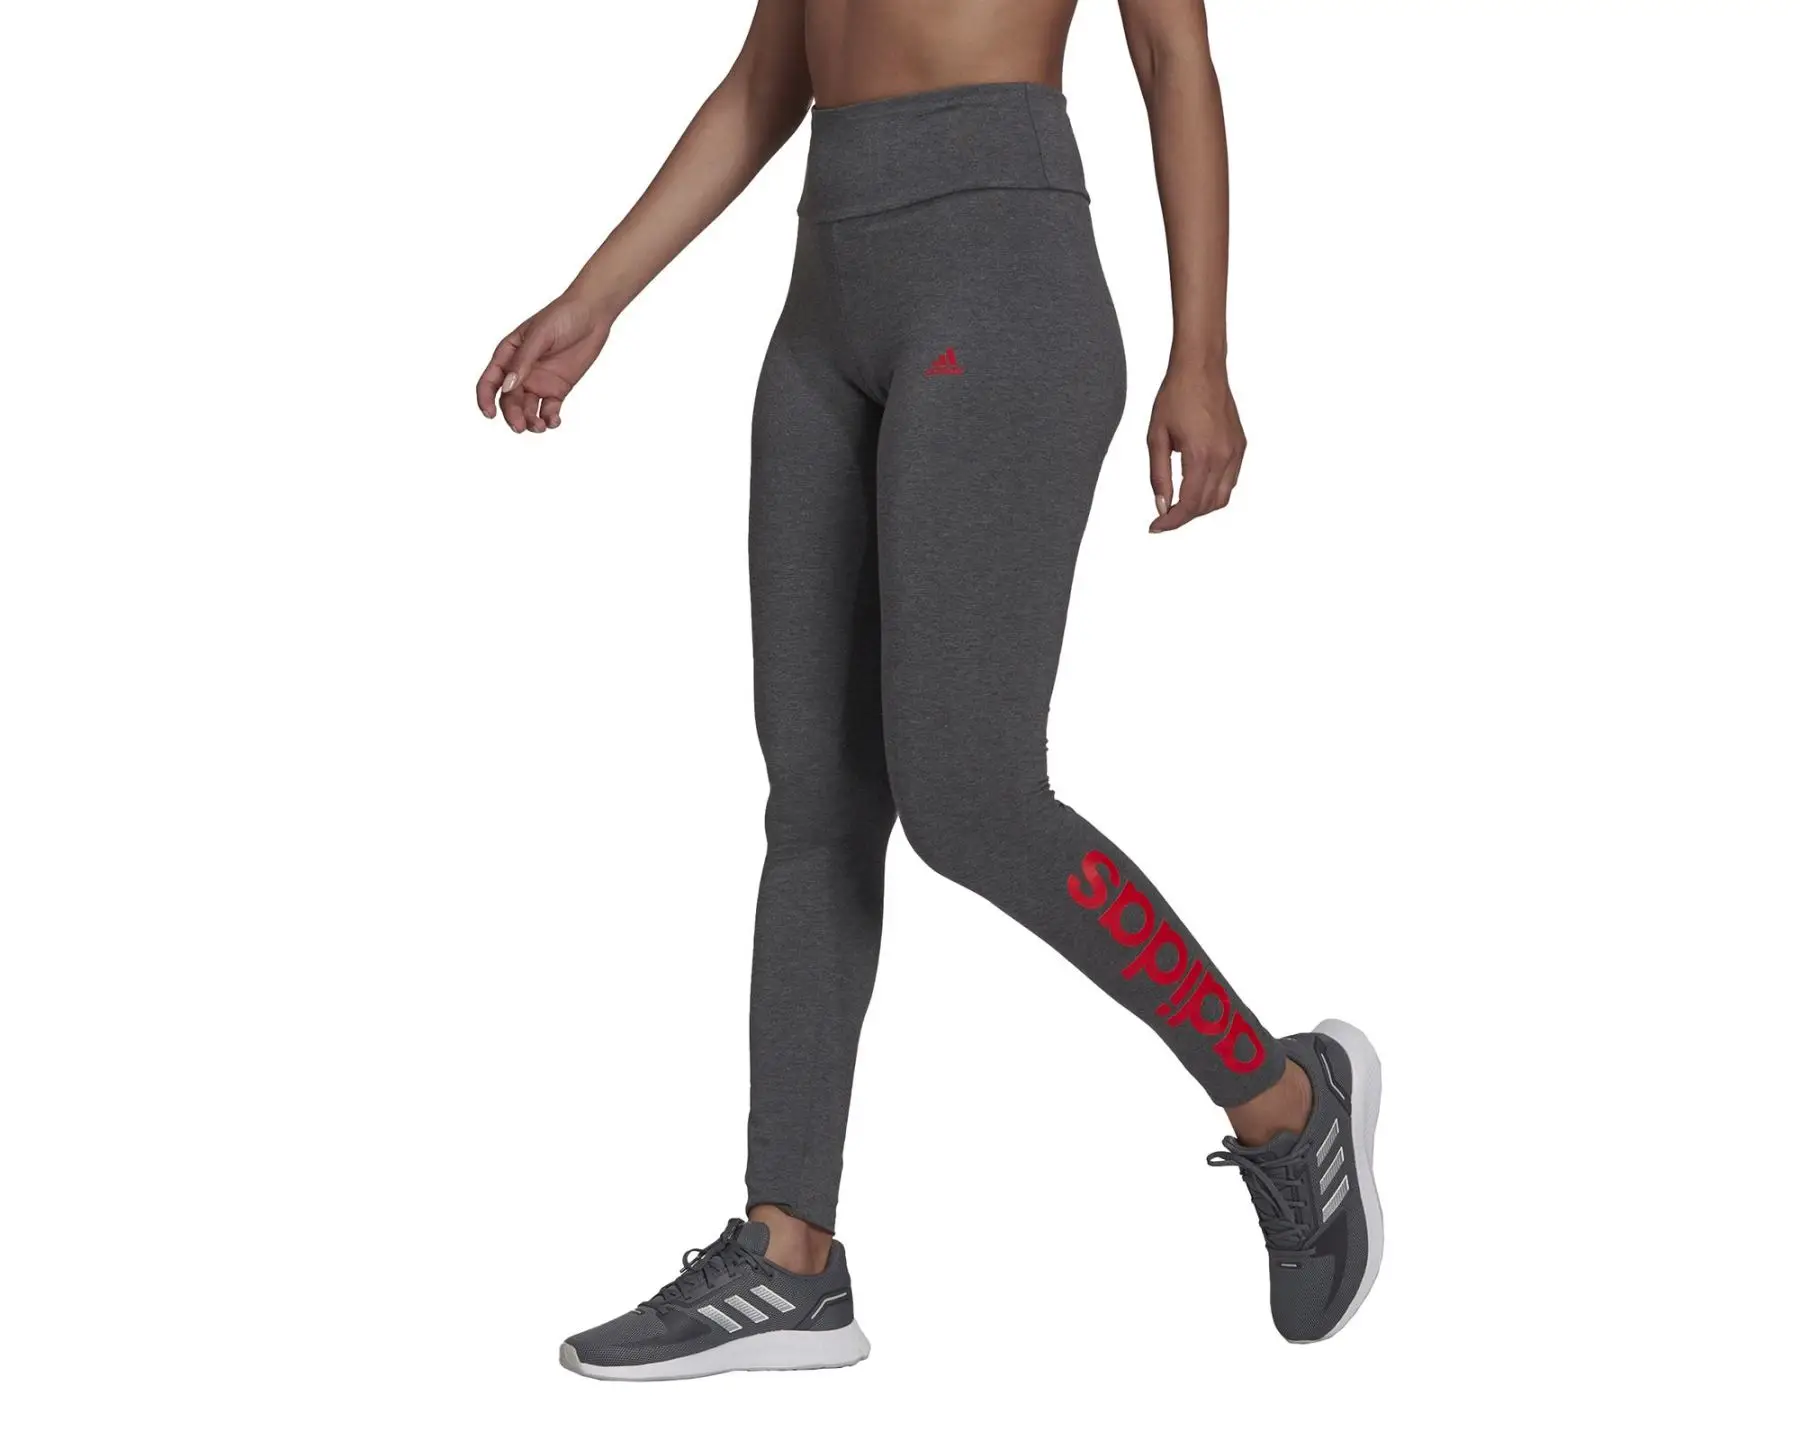 Adidas Original Women's Training Tights Gray Color with High Cotton Content and High Waist Extra Comfort Sport Walking Yoga